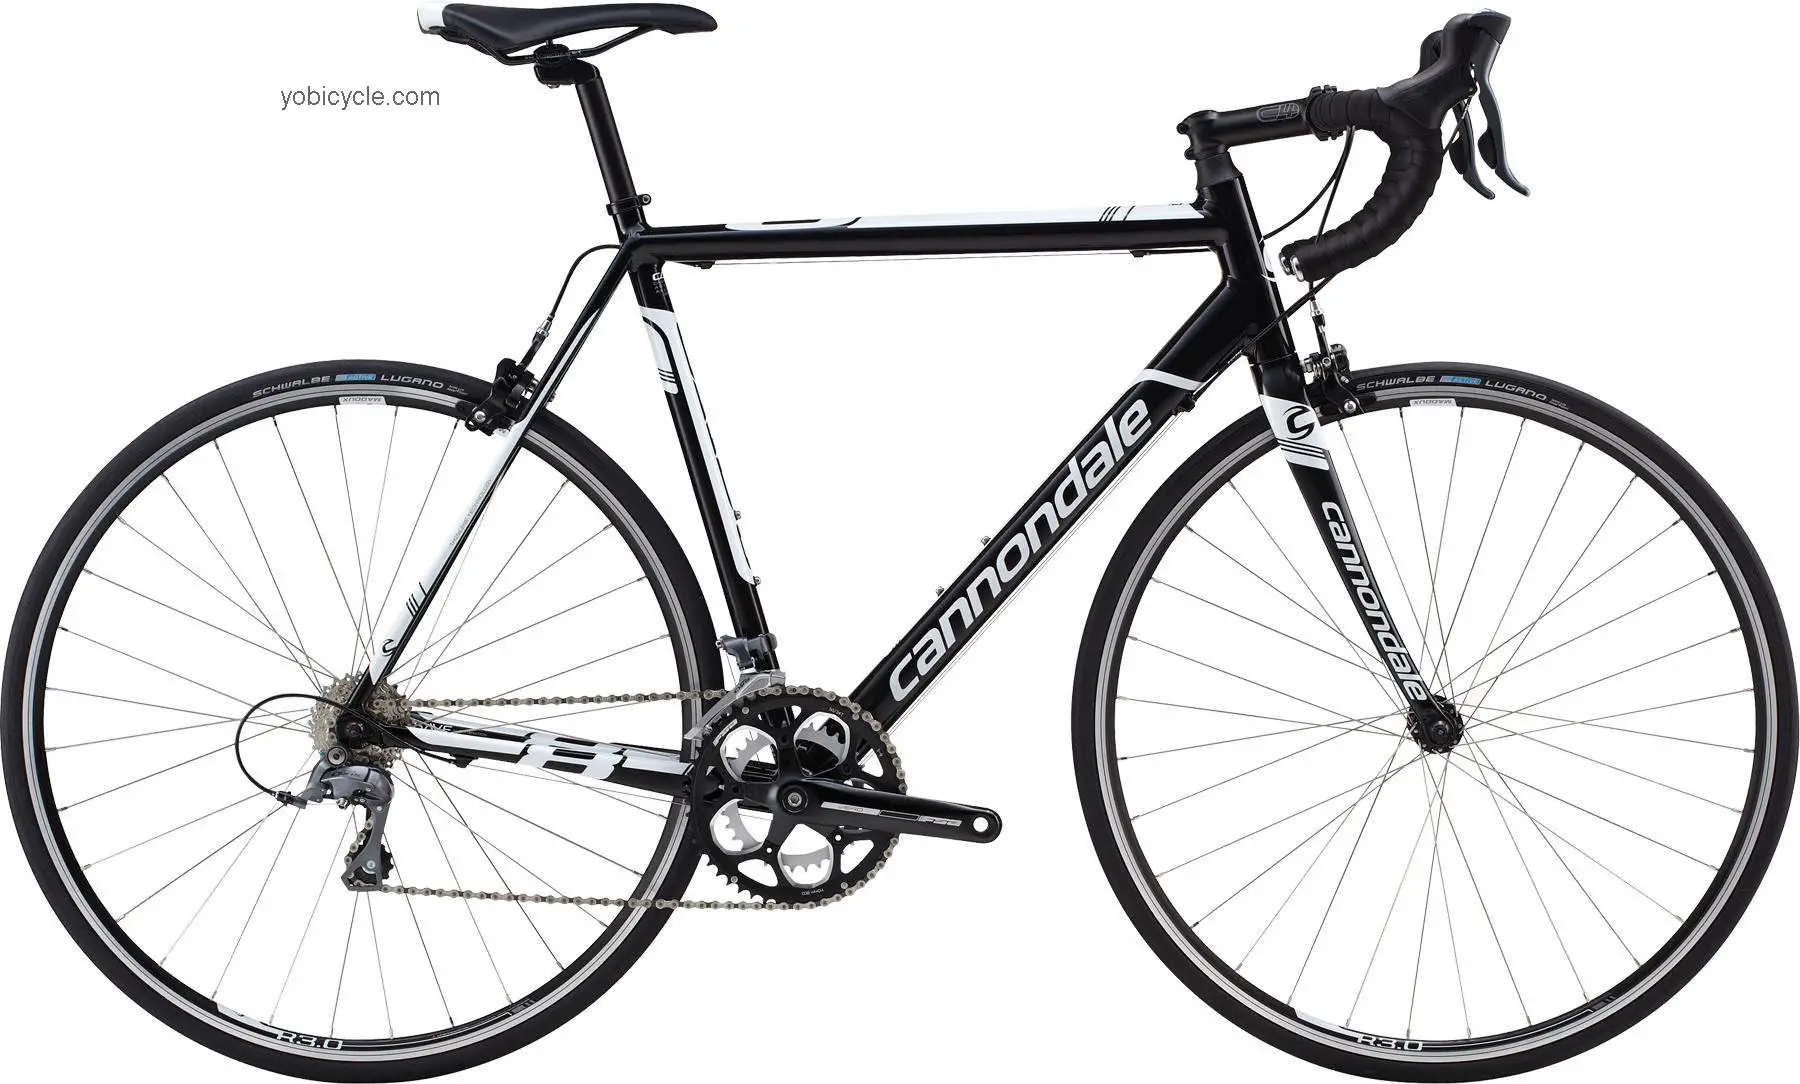 Cannondale CAAD8 8 Claris Compact 2014 comparison online with competitors